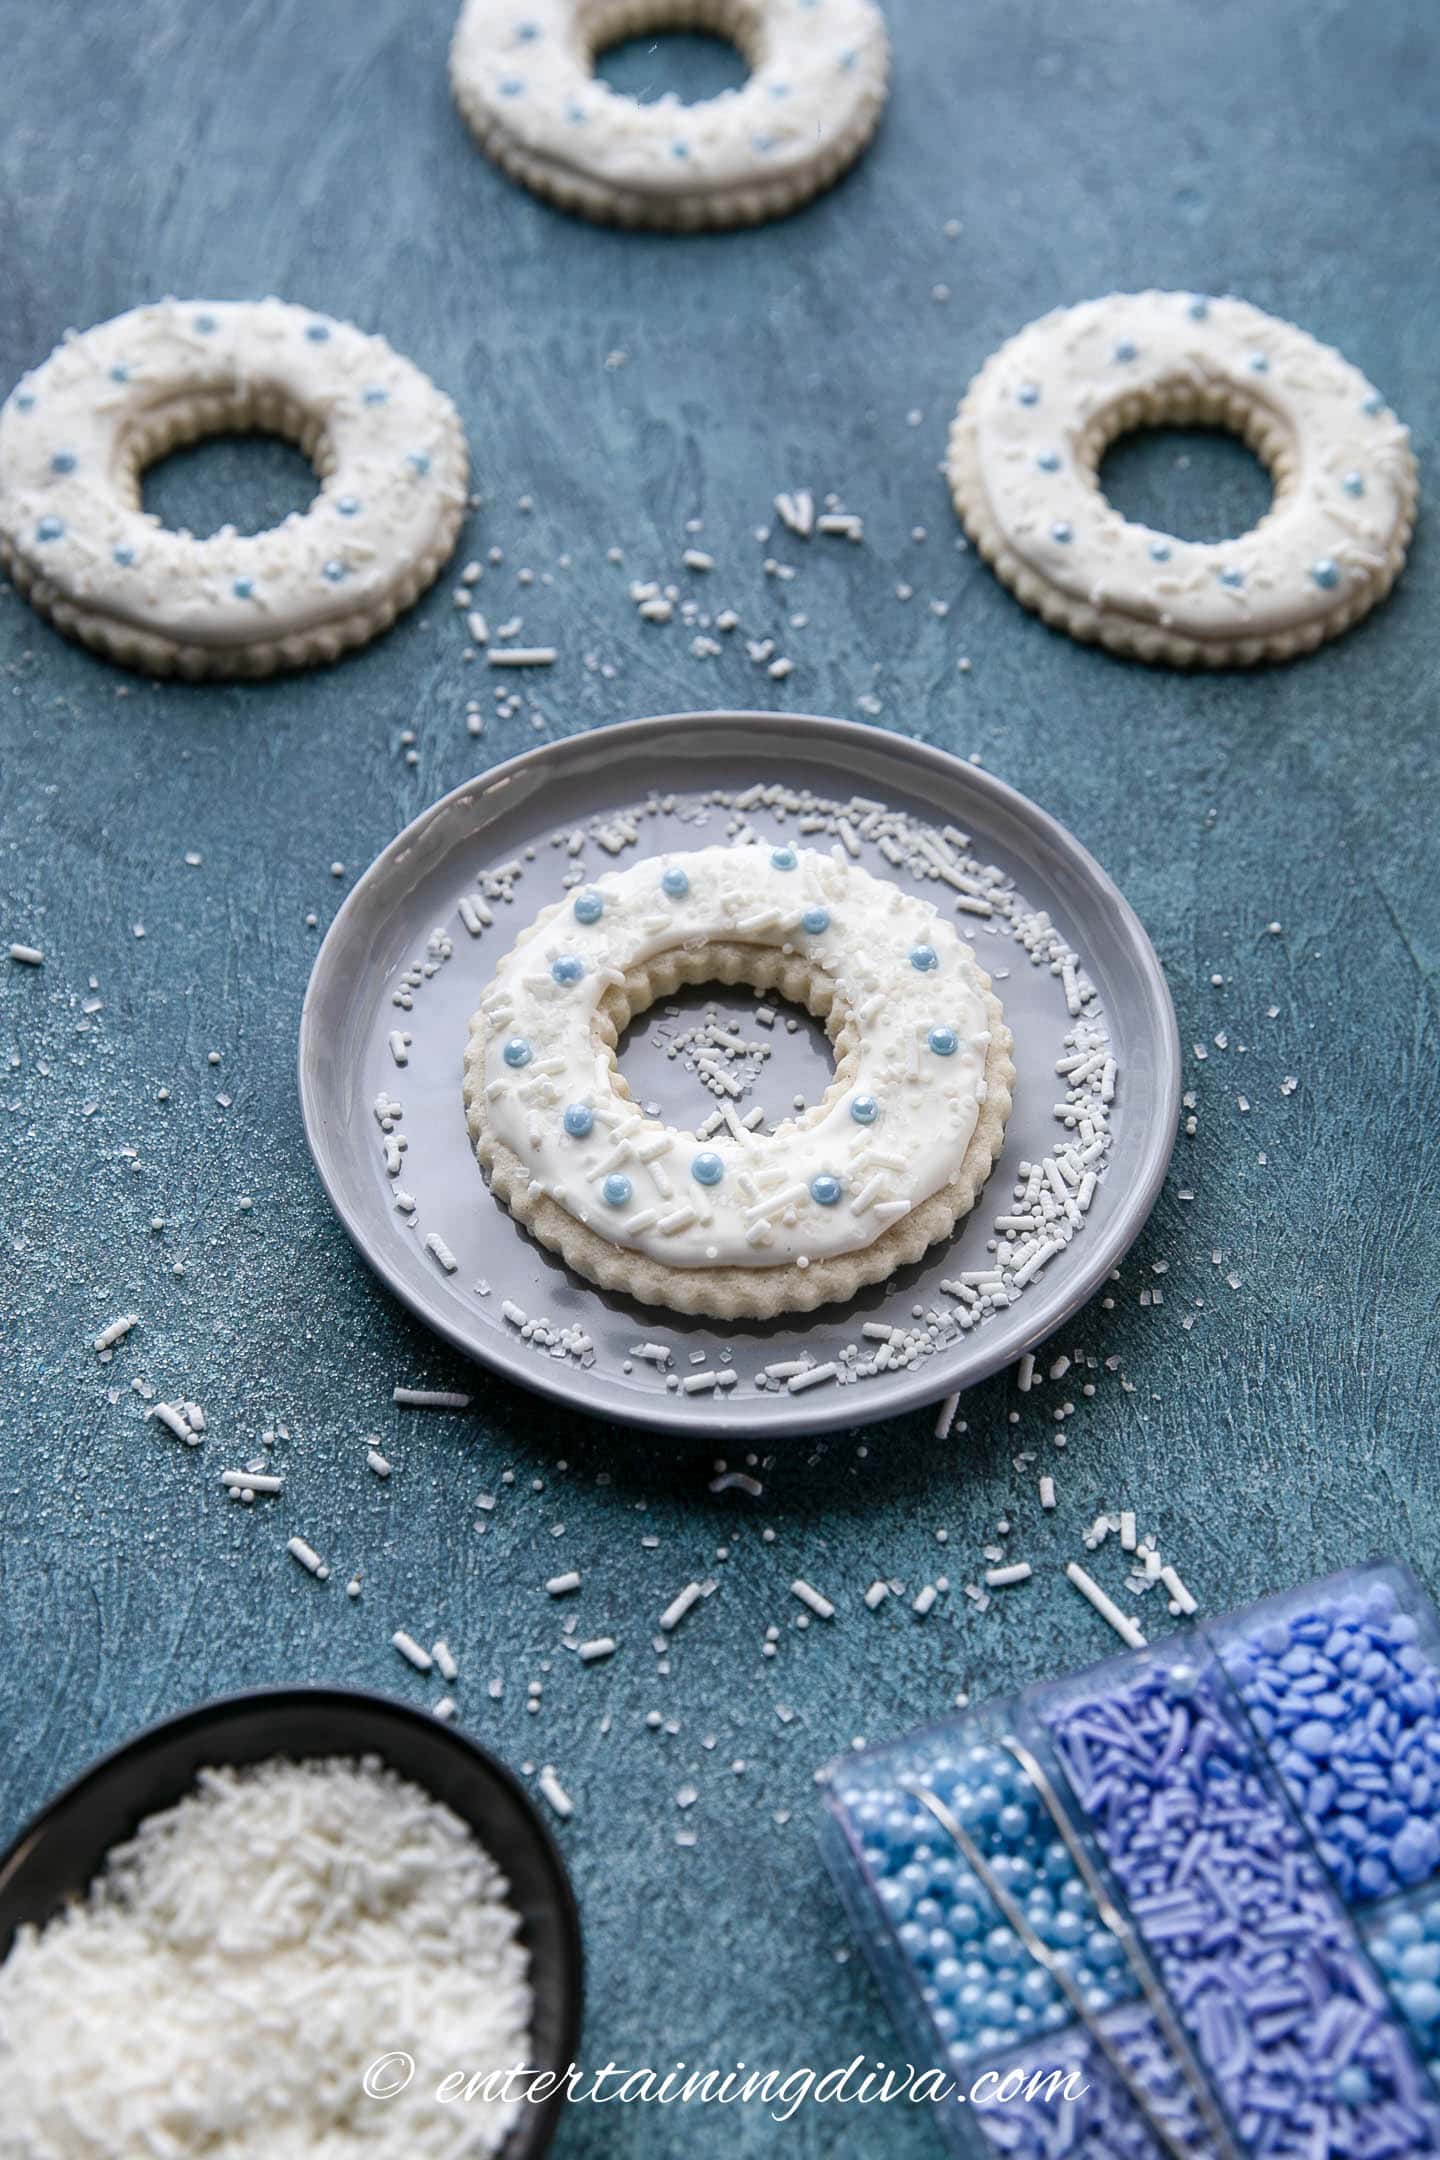 wreath sugar cookies decorated with white royal icing and blue sugar balls